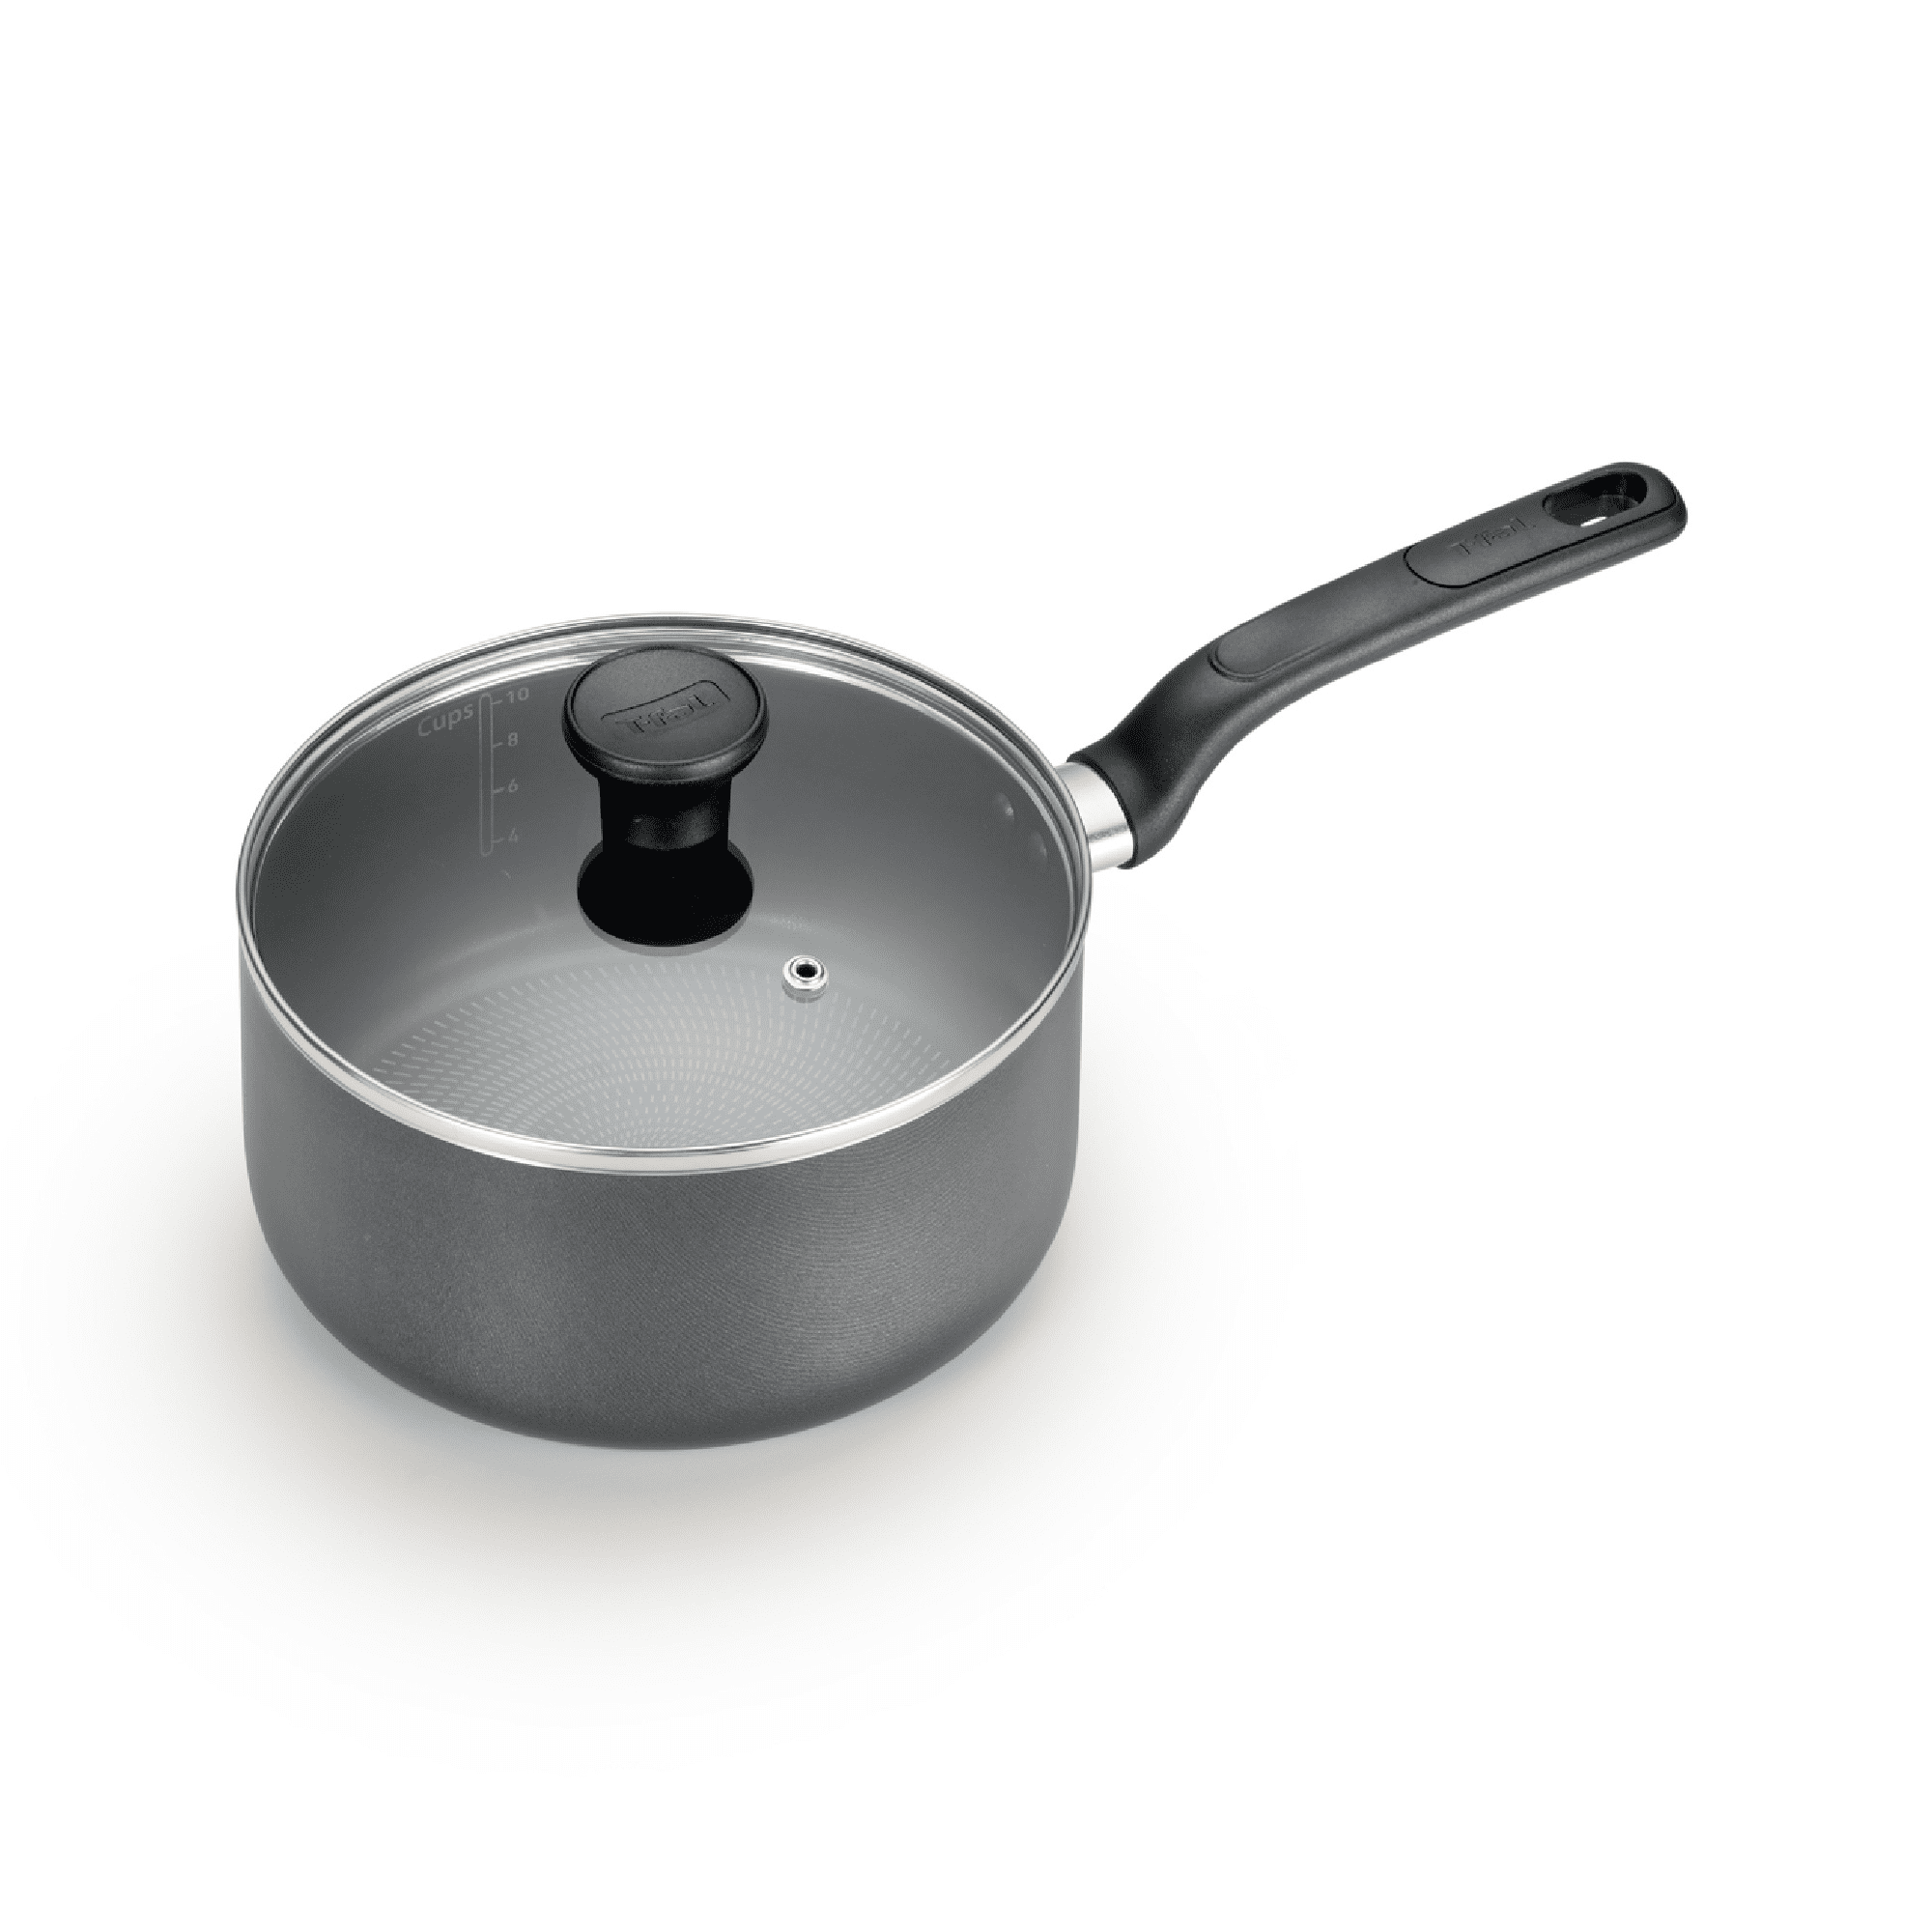 Eternal 2 qt. Non-Stick Stainless Steel (18/10) Saucepan with Lid